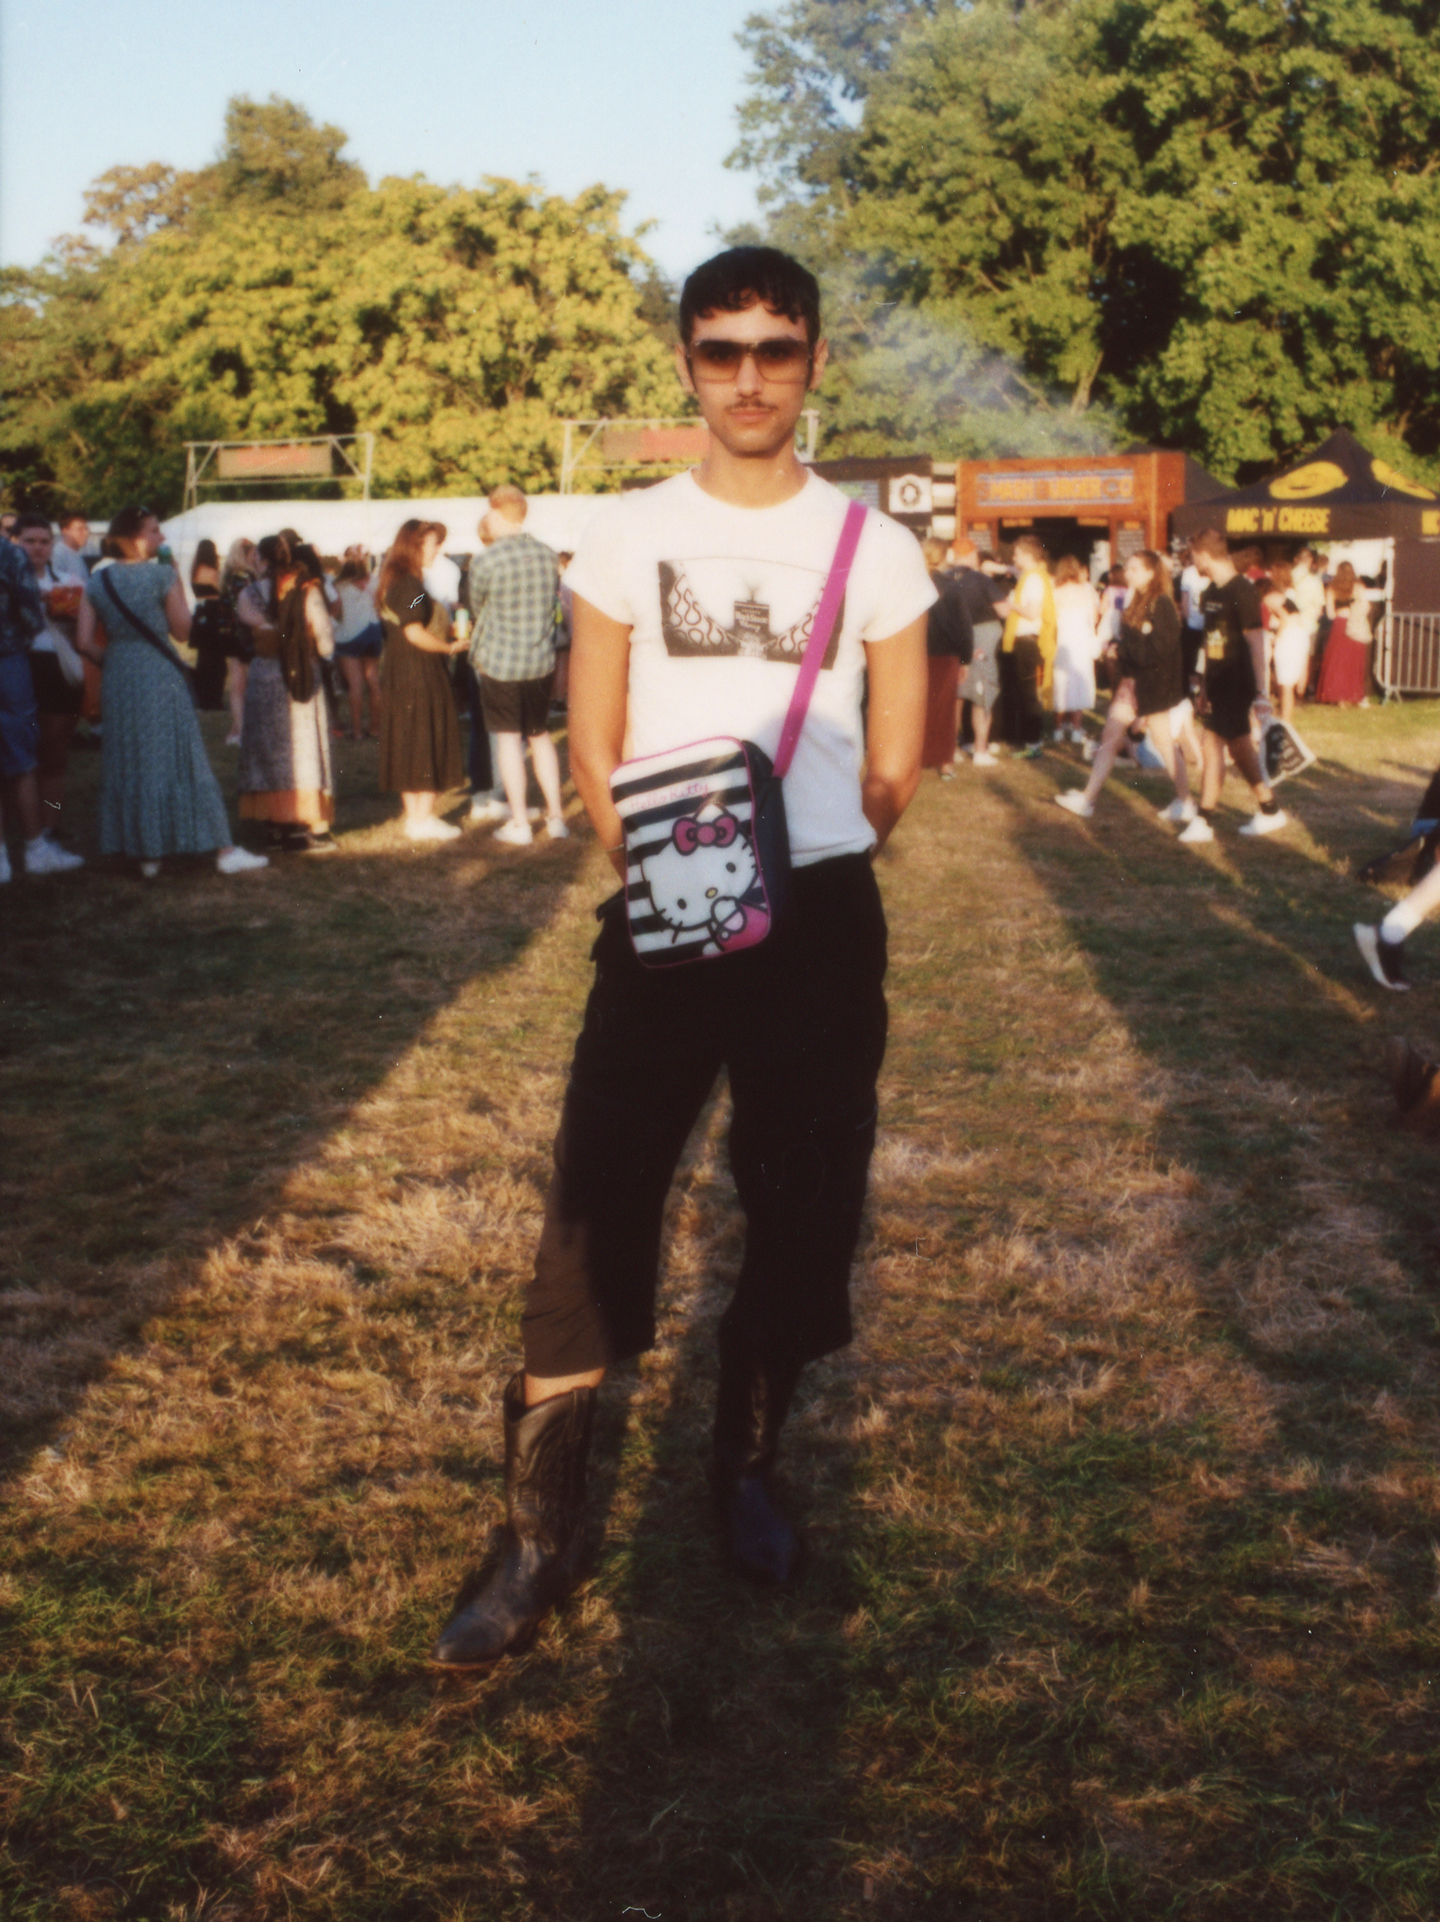 a festival-goert with facial hair wears a tshirt with cartoon breasts on it, a hello kitty messanger bag, jeans and cowboy boots photographed by Jody Evans